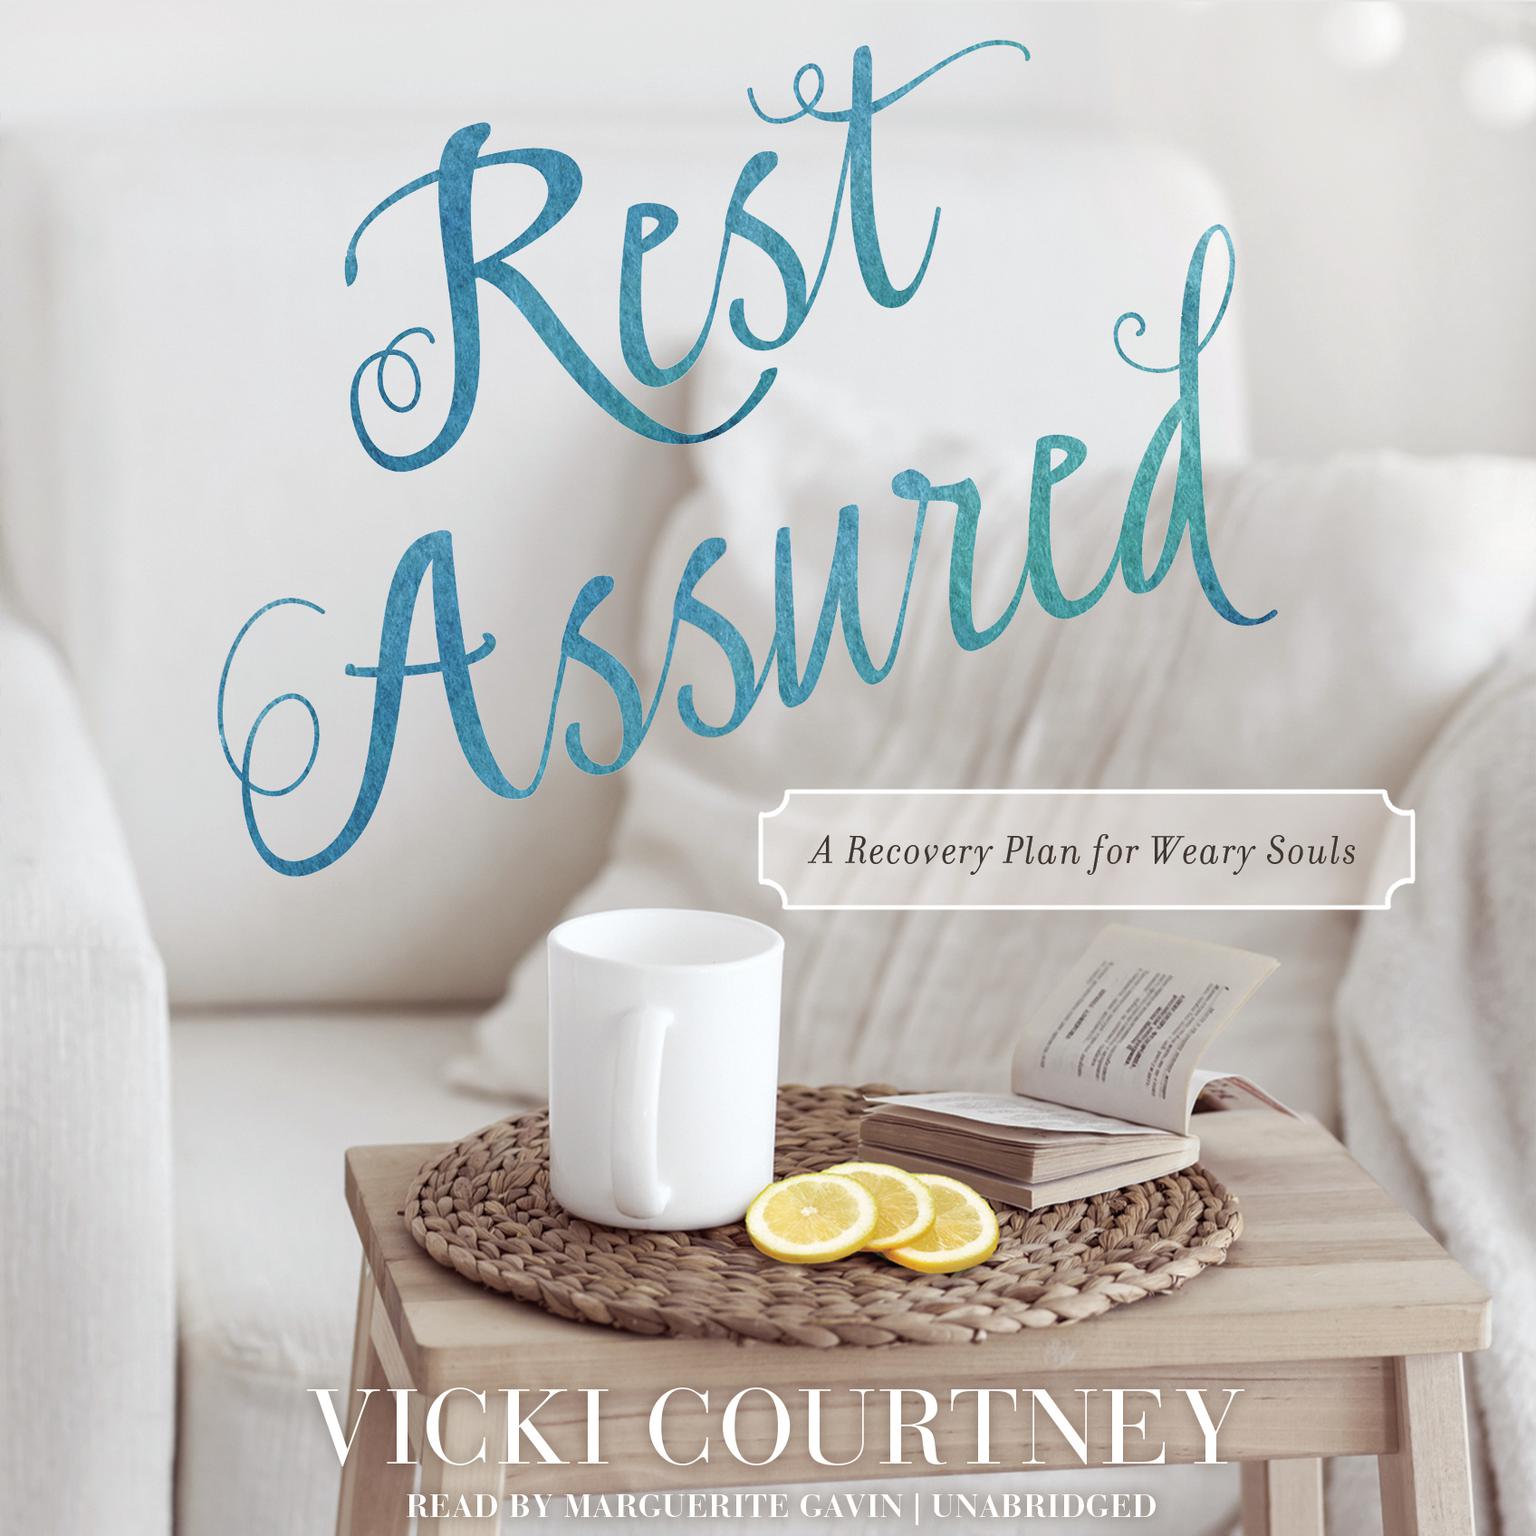 Rest Assured: A Recovery Plan for Weary Souls Audiobook, by Vicki Courtney